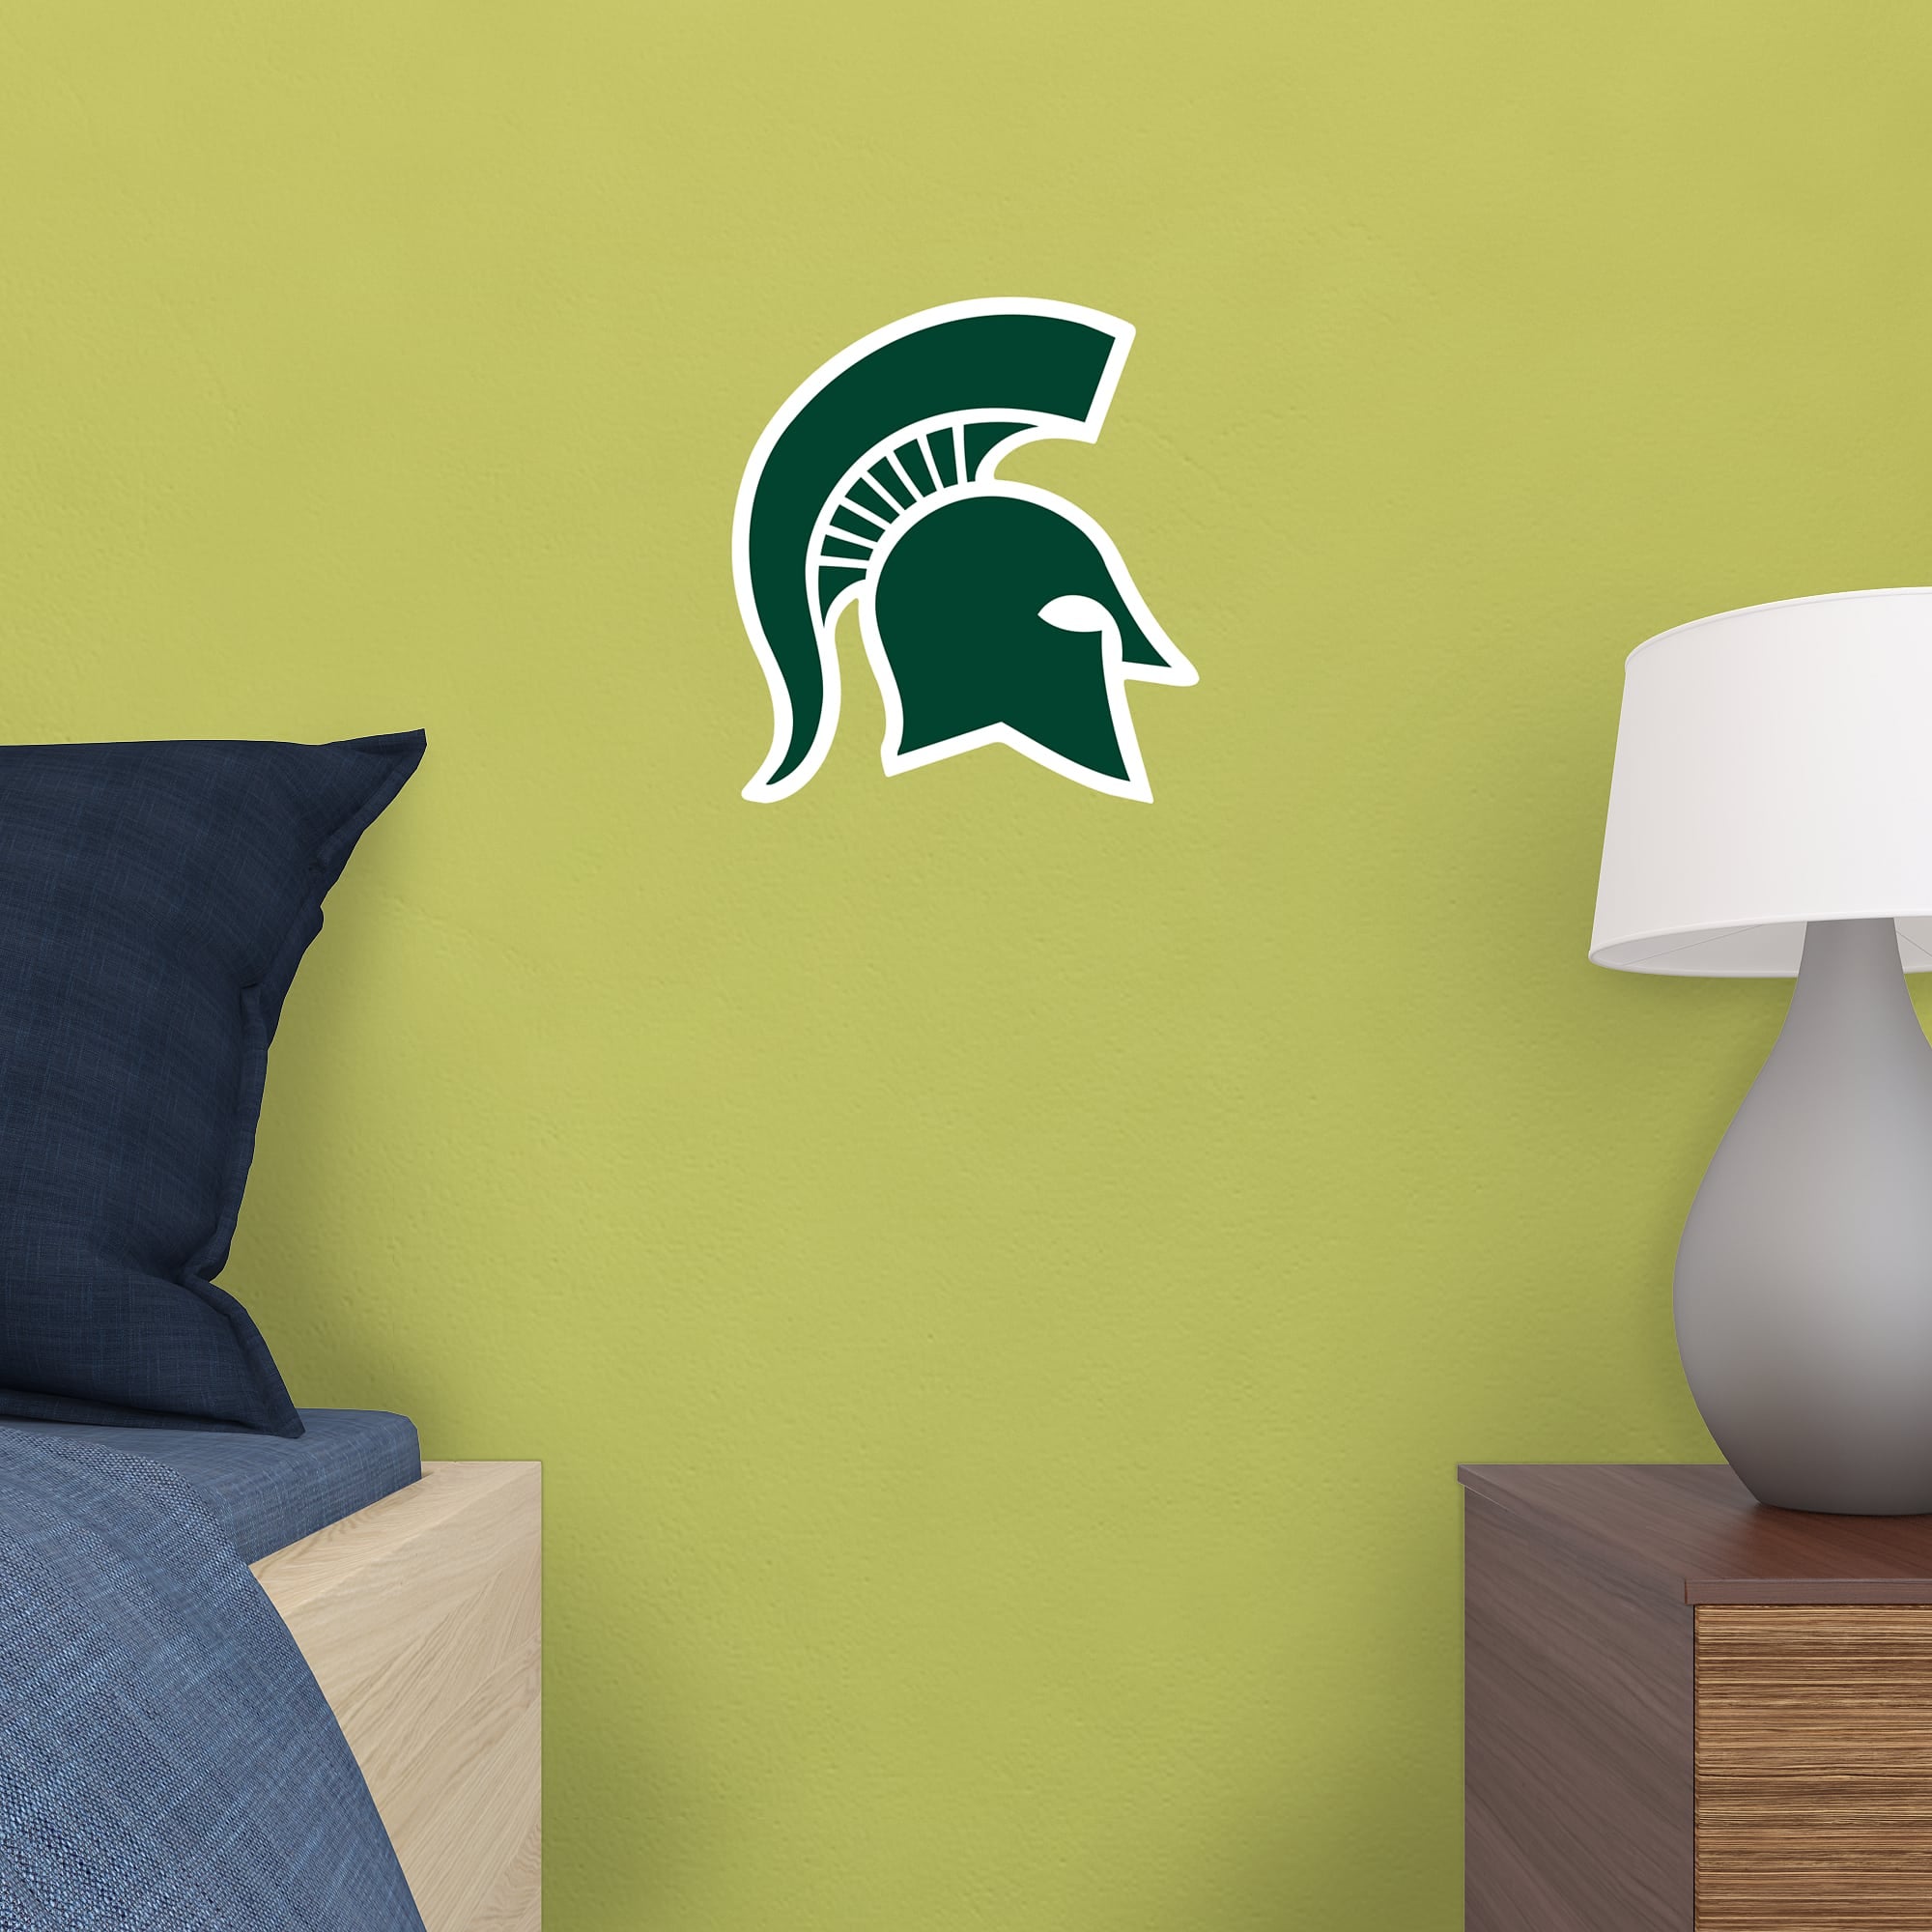 Michigan State Spartans: Logo - Officially Licensed Removable Wall Decal 10.5"W x 11.0"H by Fathead | Vinyl